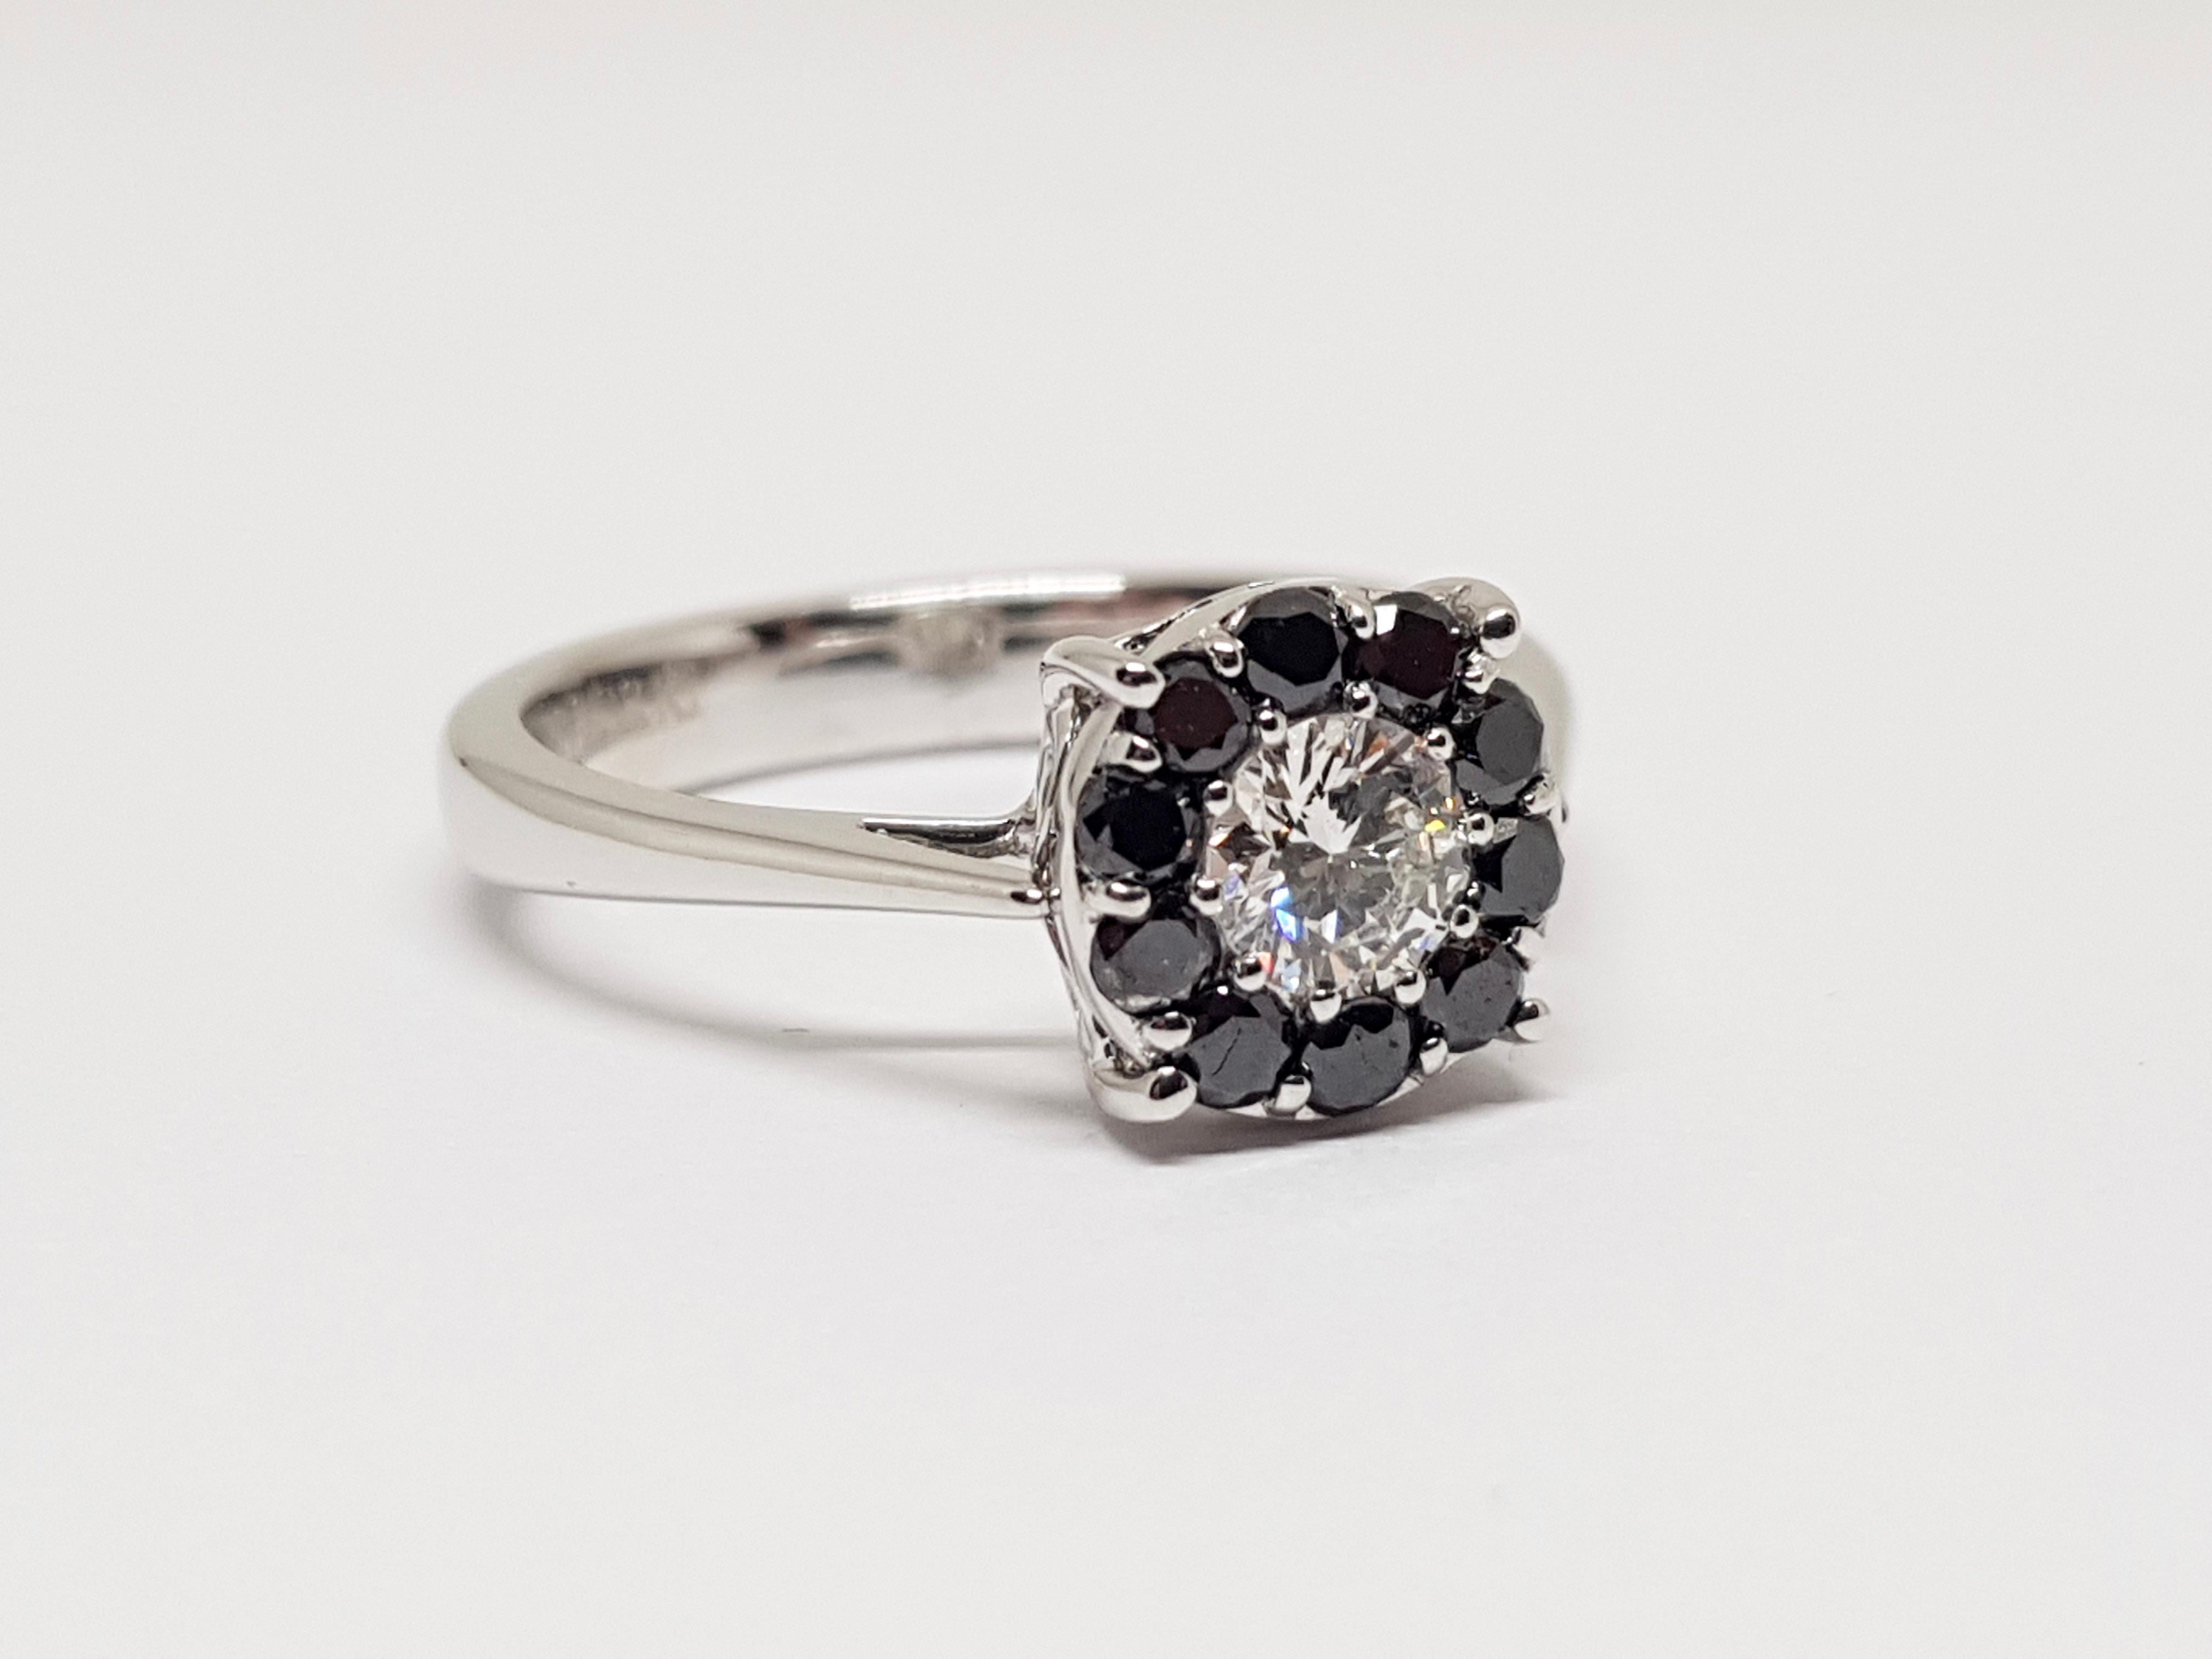 Signed Dhamani 750
Gold: 18 Carat White gold
Weight: 4.92 gr.
Central Diamond: 0.55ct. E / VVS1
Accent Diamonds: 0.30ct. Black Diamonds
Ring size: 57 / 18mm
Free resizing of Ring up to size 70 / 22mm
All our jewellery comes with a certificate and 5